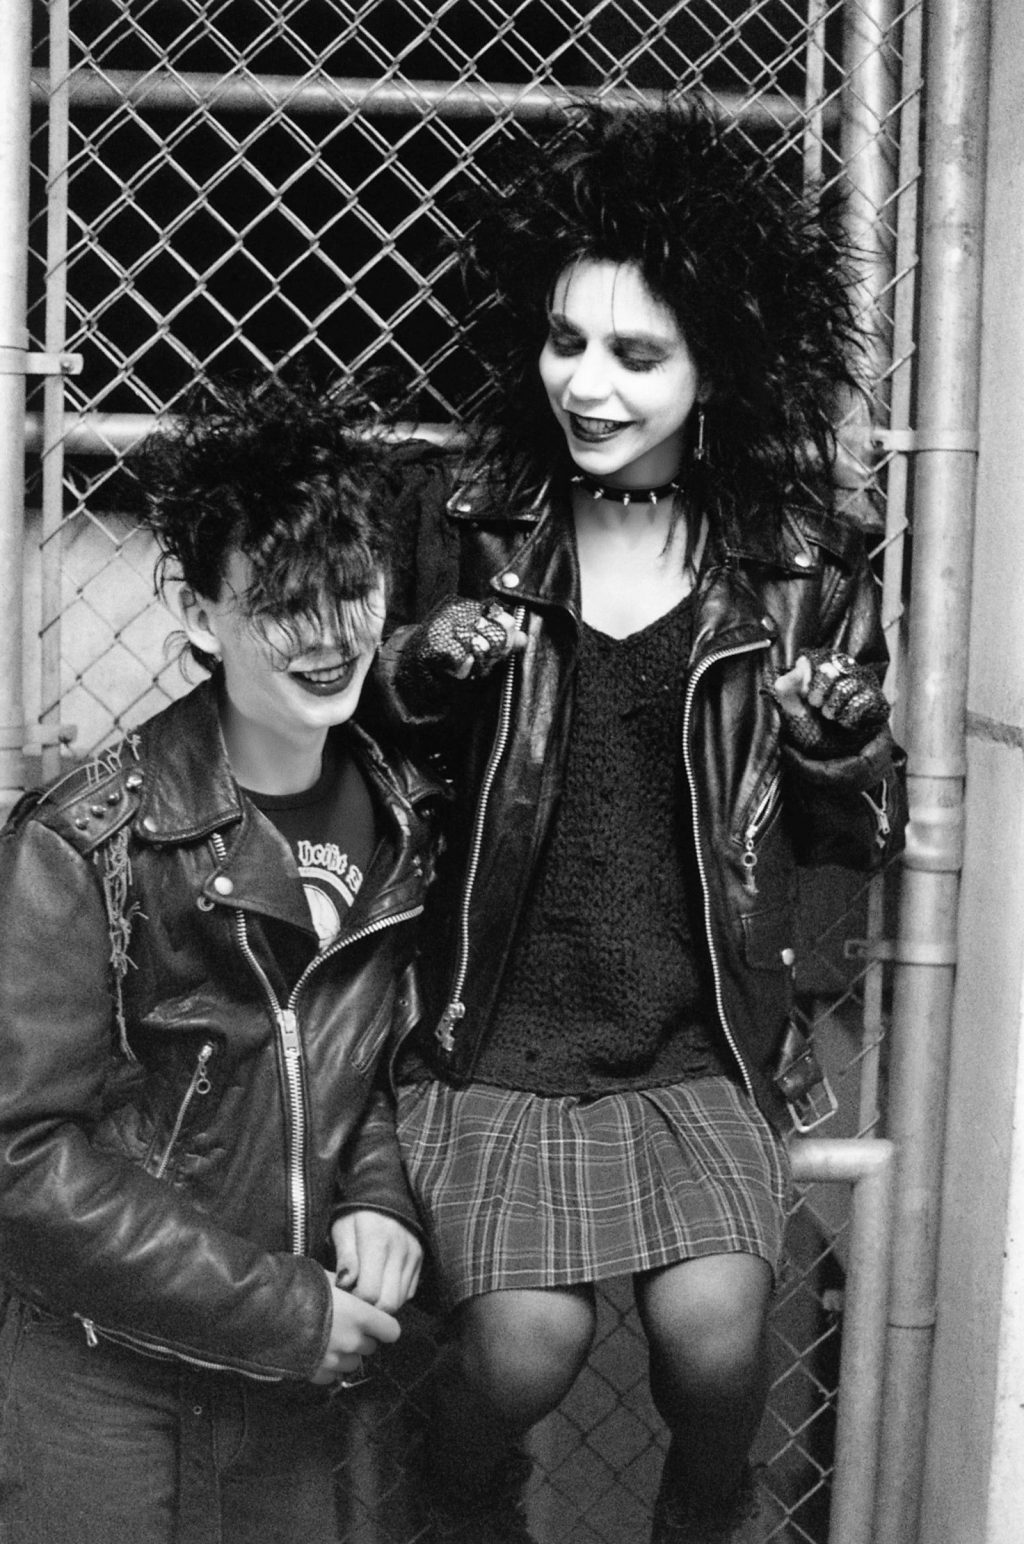 2 women in Goth style during 1980s